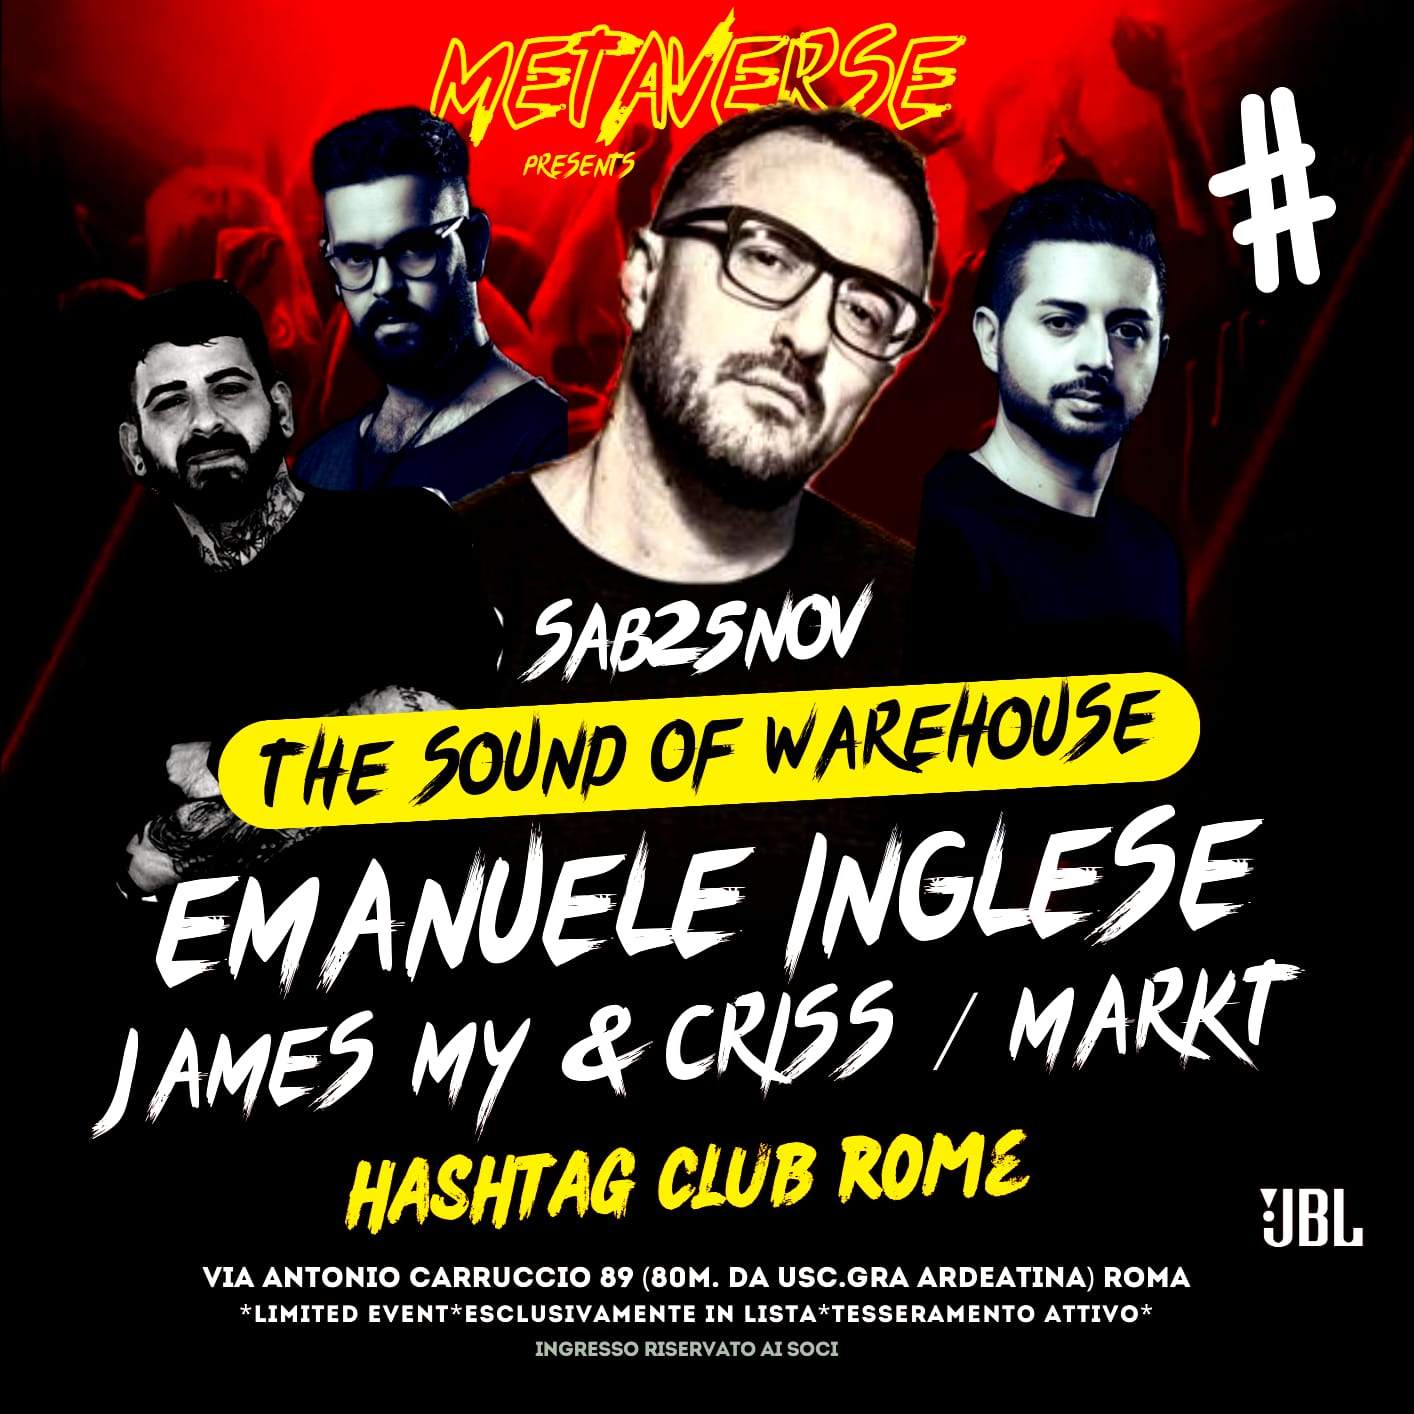 Metaverse presents: The Sound Of Warehouse - フライヤー表